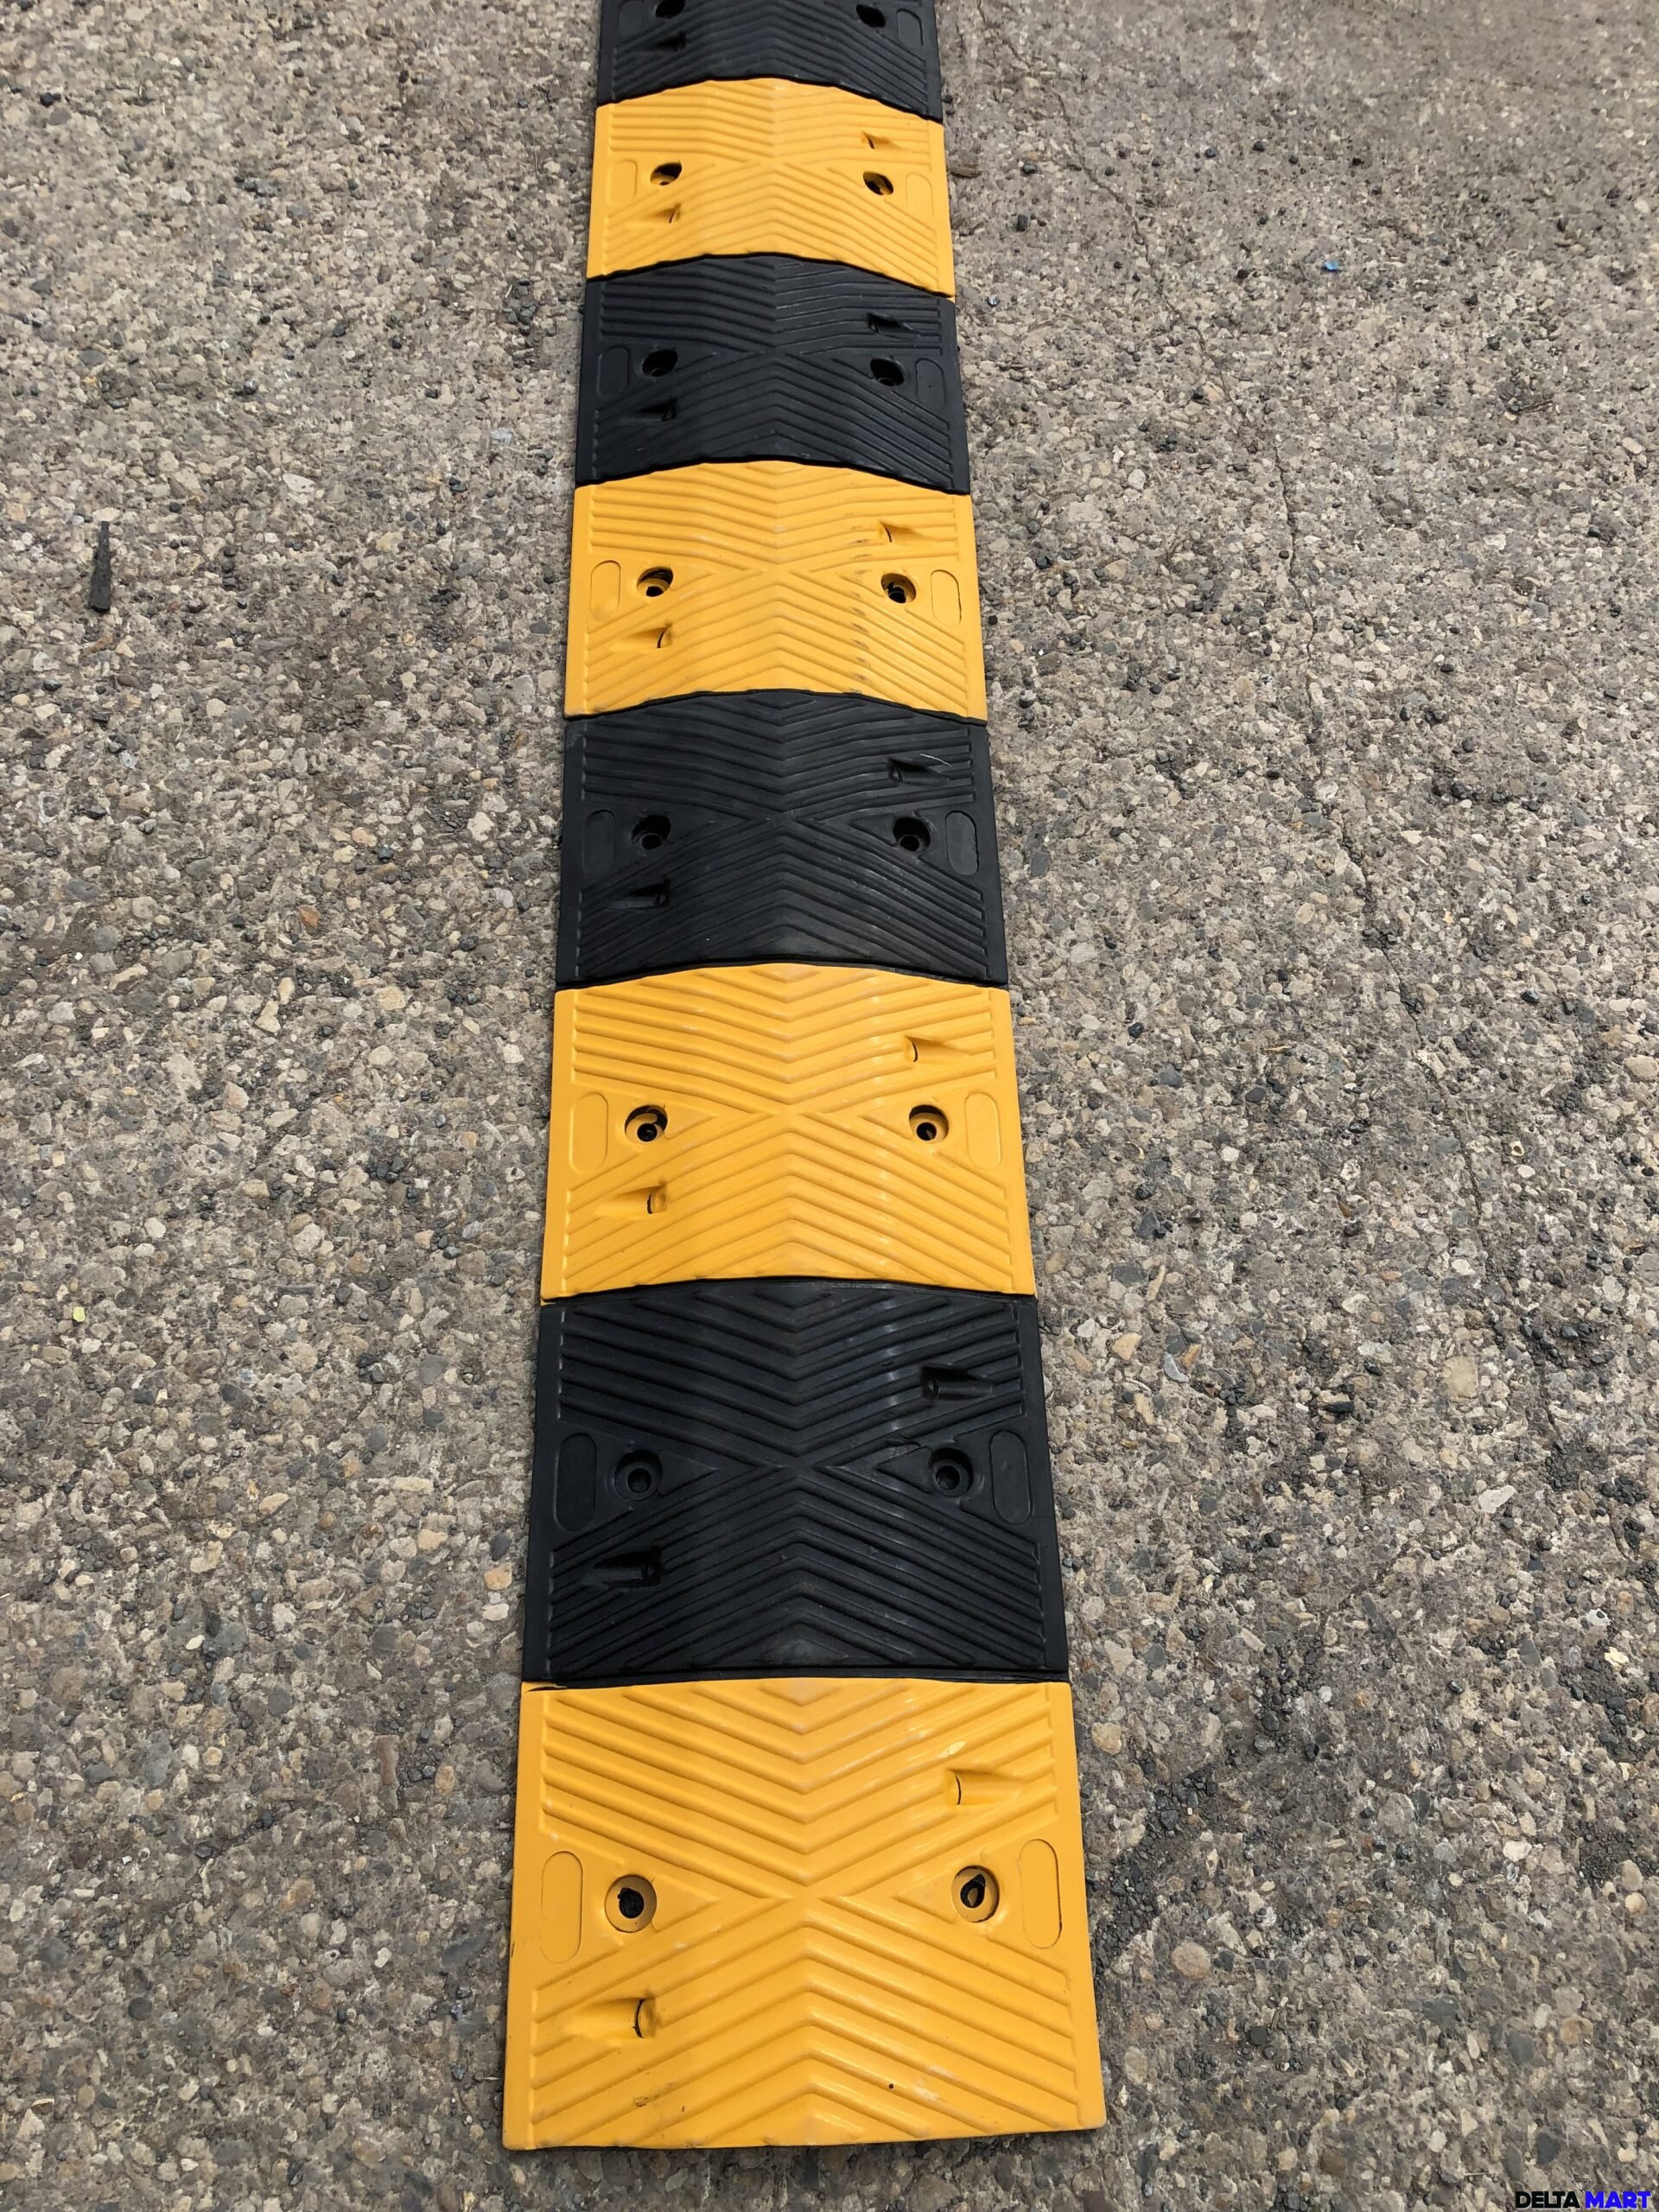 For Rubber Speed Bumps 500mm X 350mm X 50mm in UK